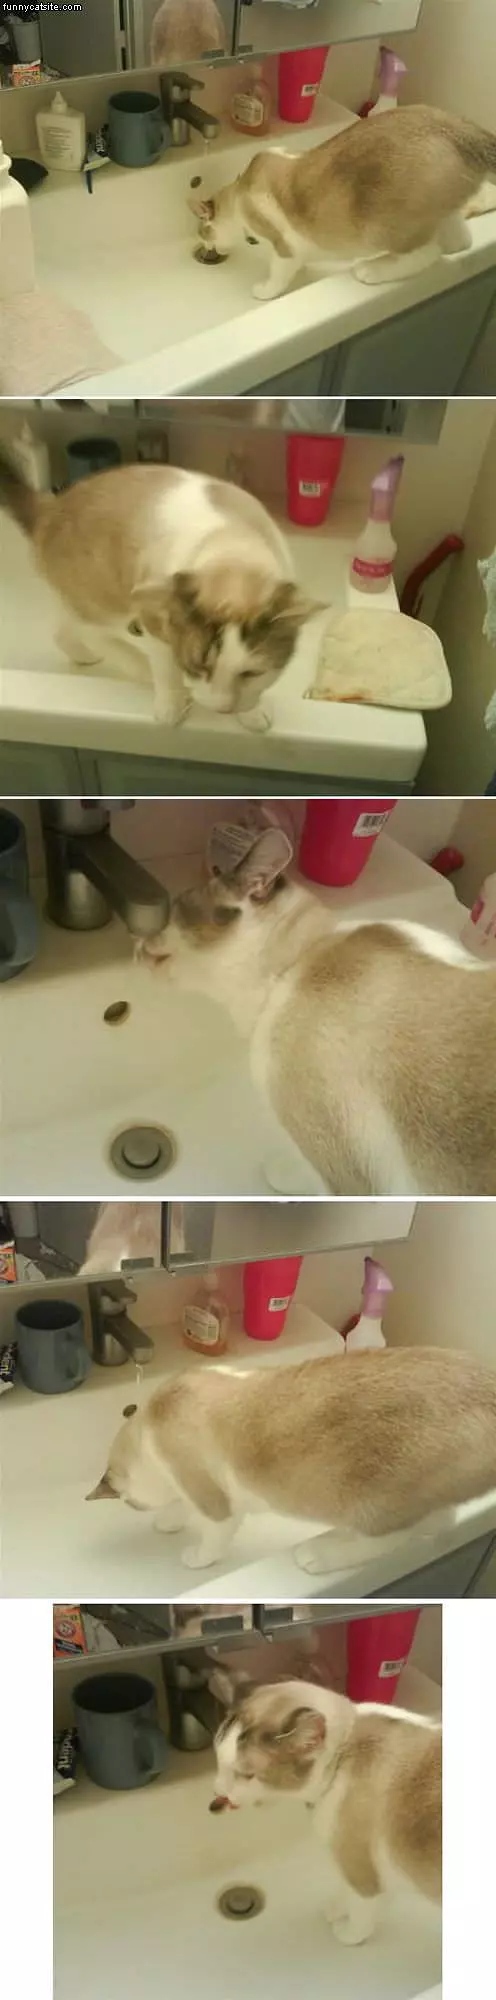 Smokey-in-the-sink